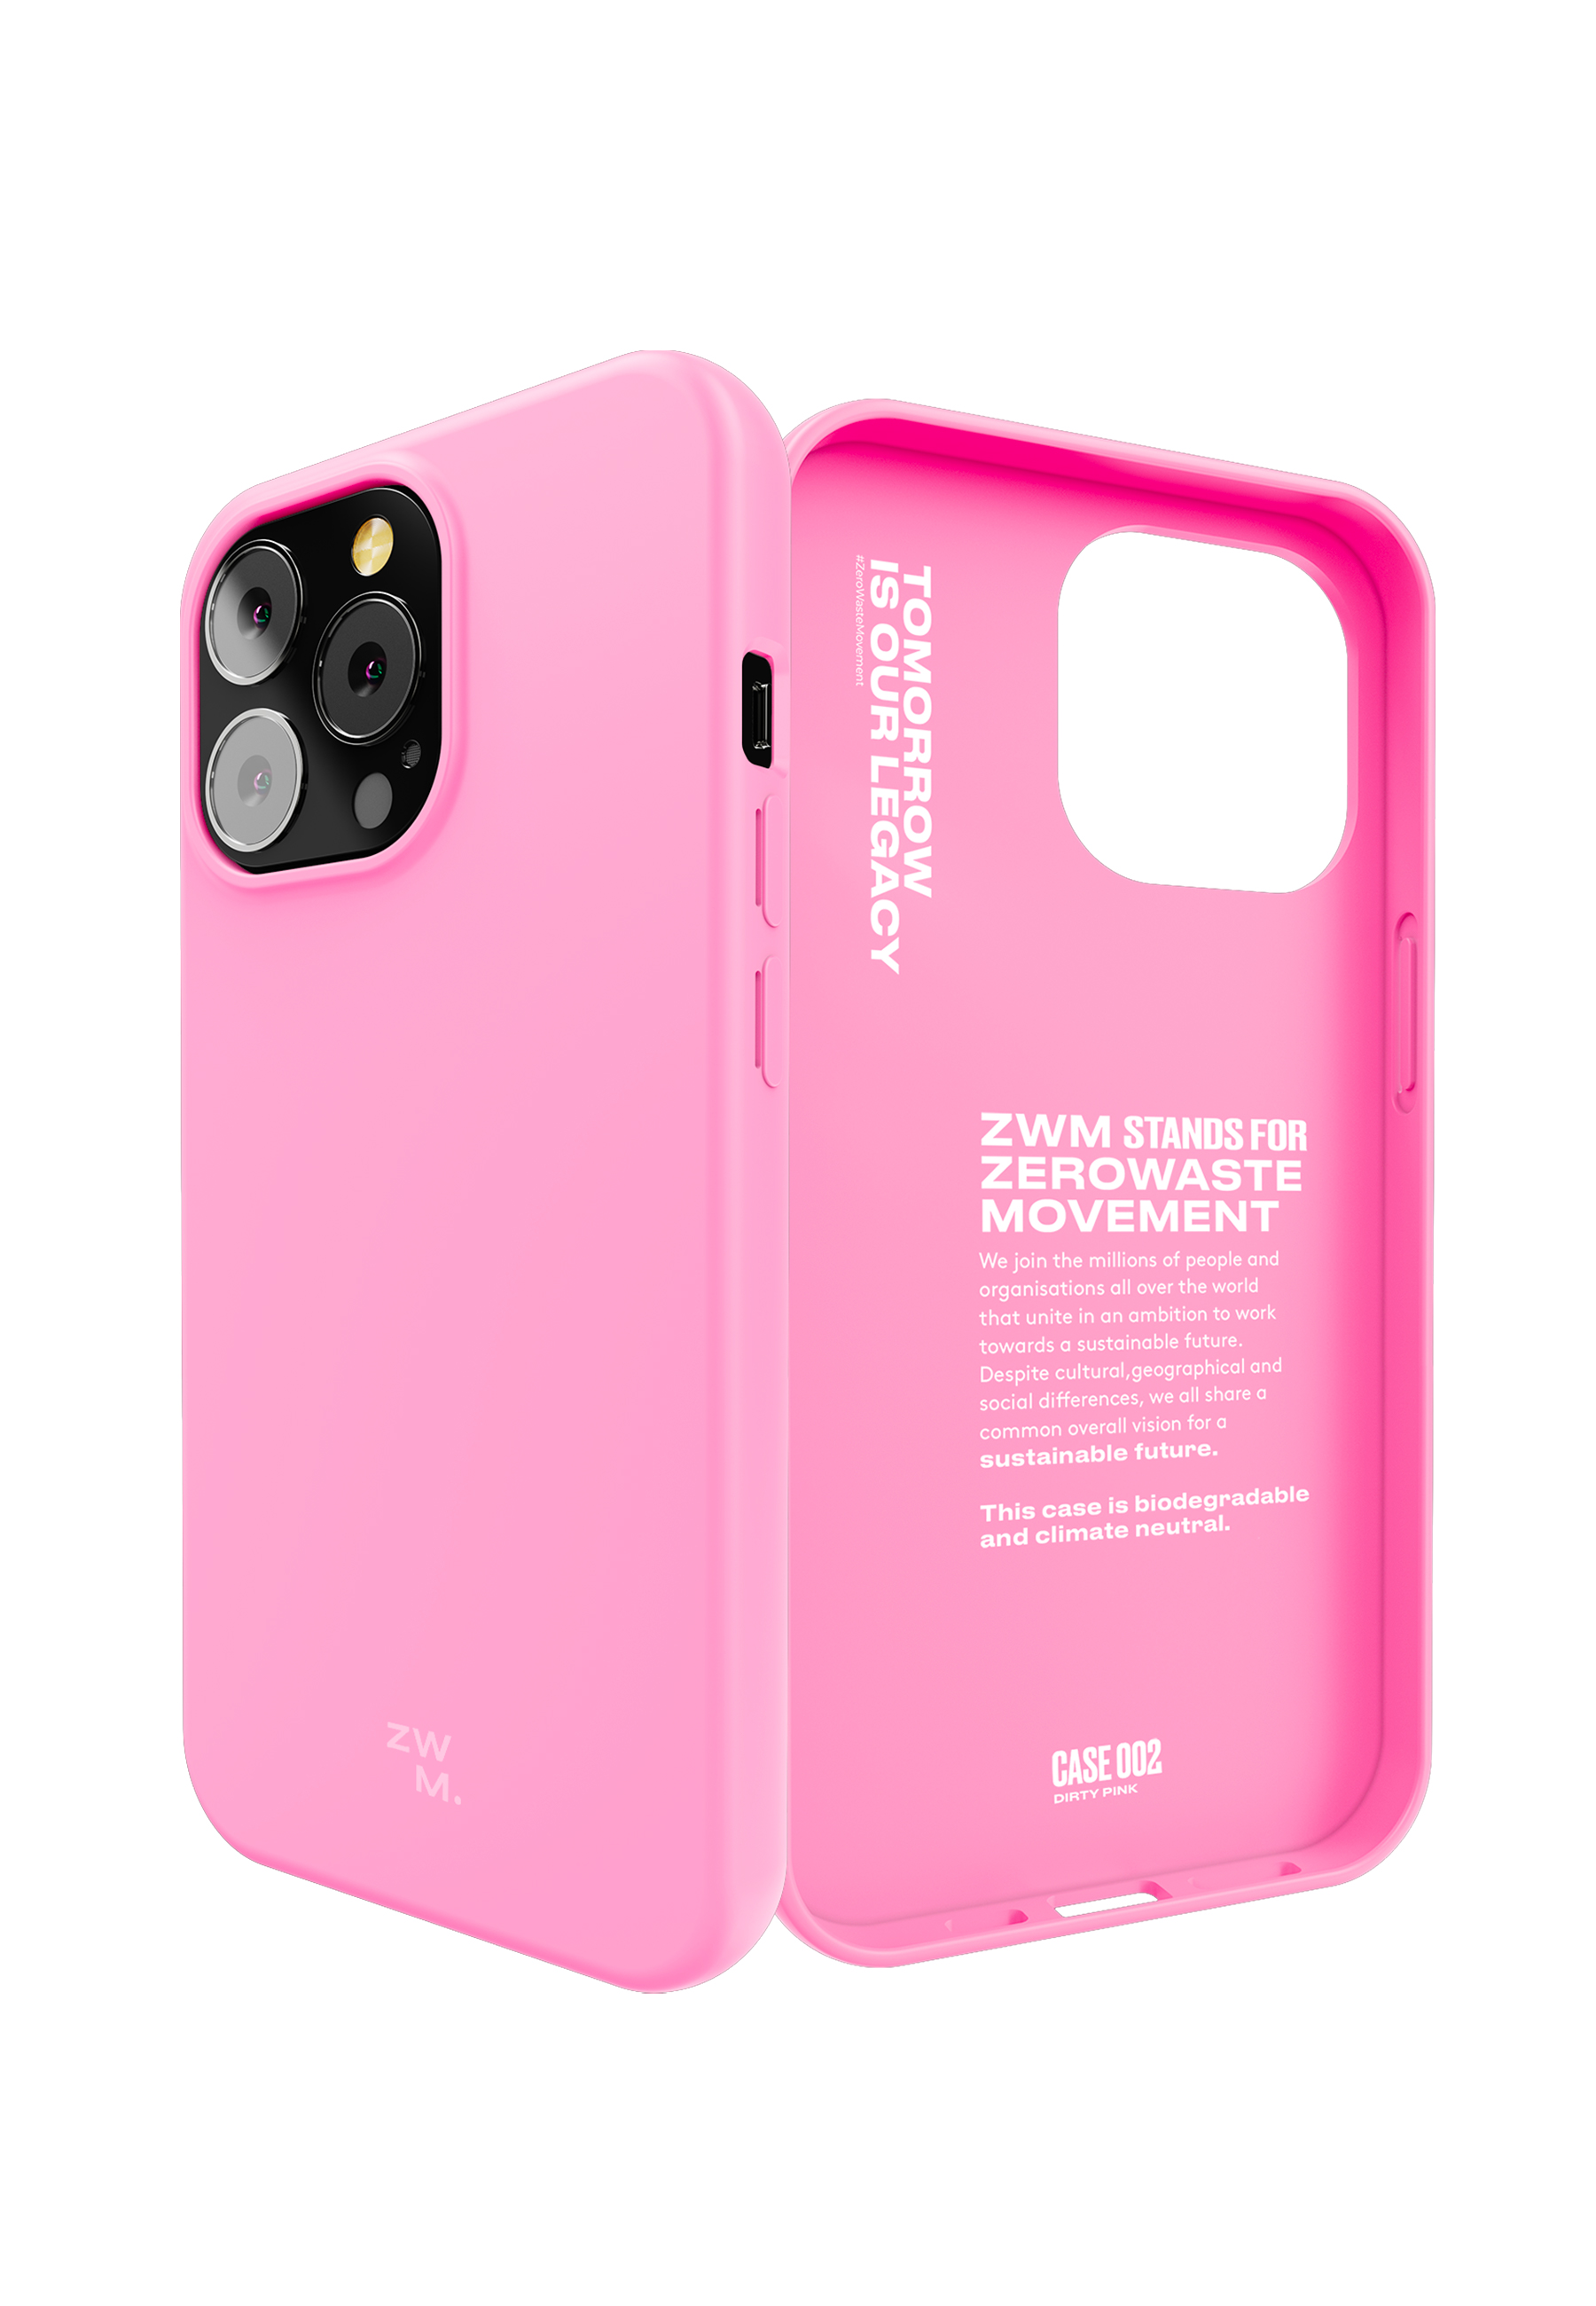 iPhone Backcover, 12/12 _13PM, ZWM Apple, pink Pro,